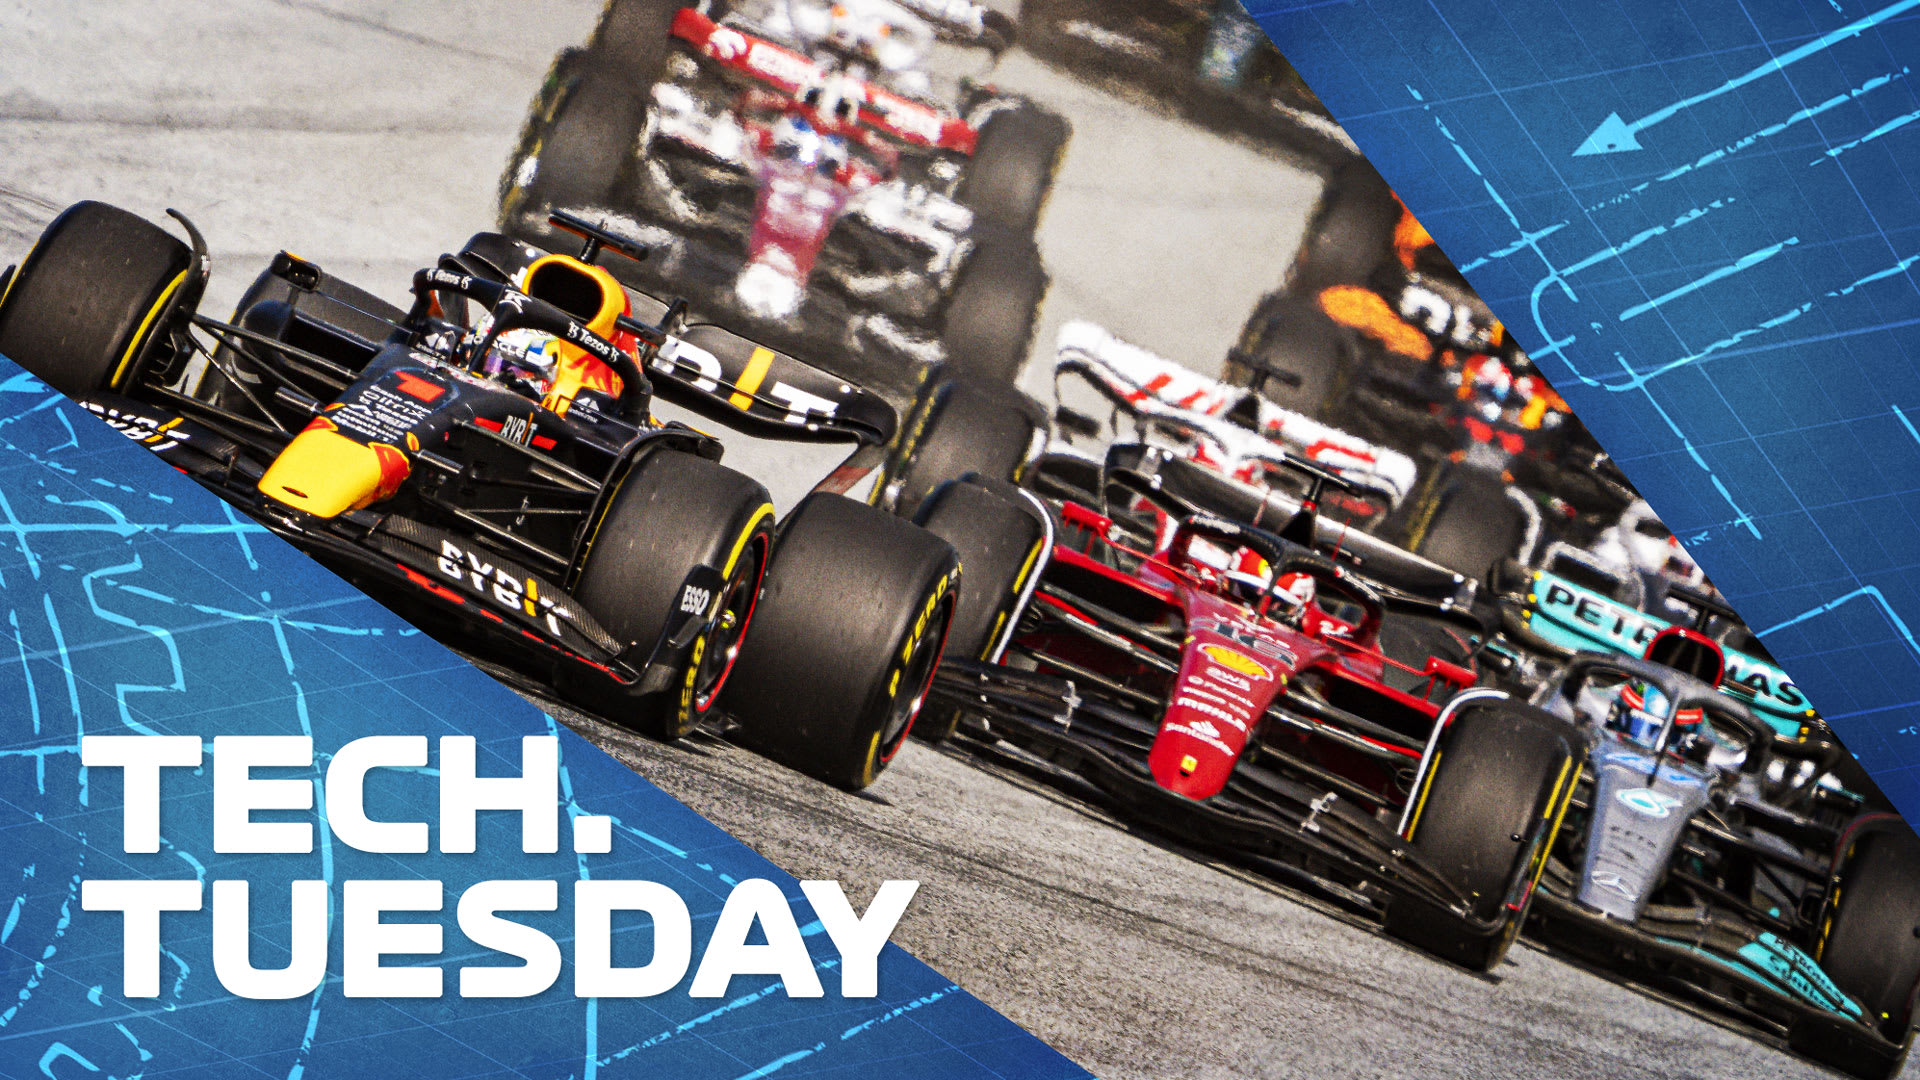 TECH TUESDAY: Assessing the strengths and weaknesses of every car